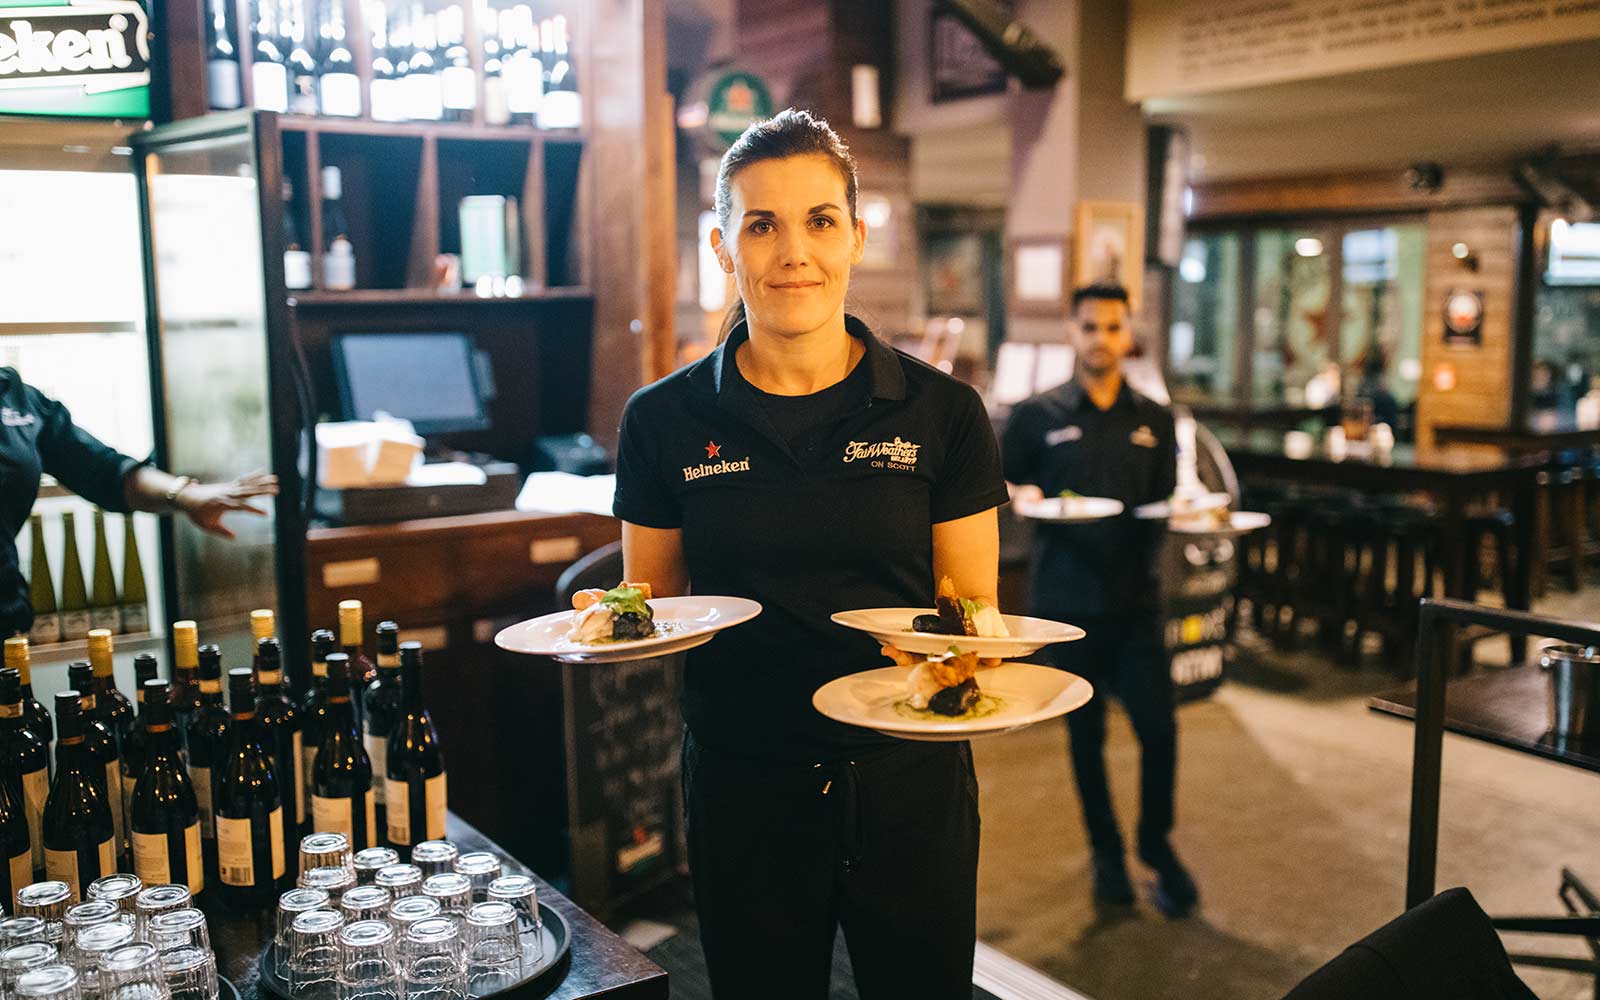 Female waiter looking at camera holding three plates of food